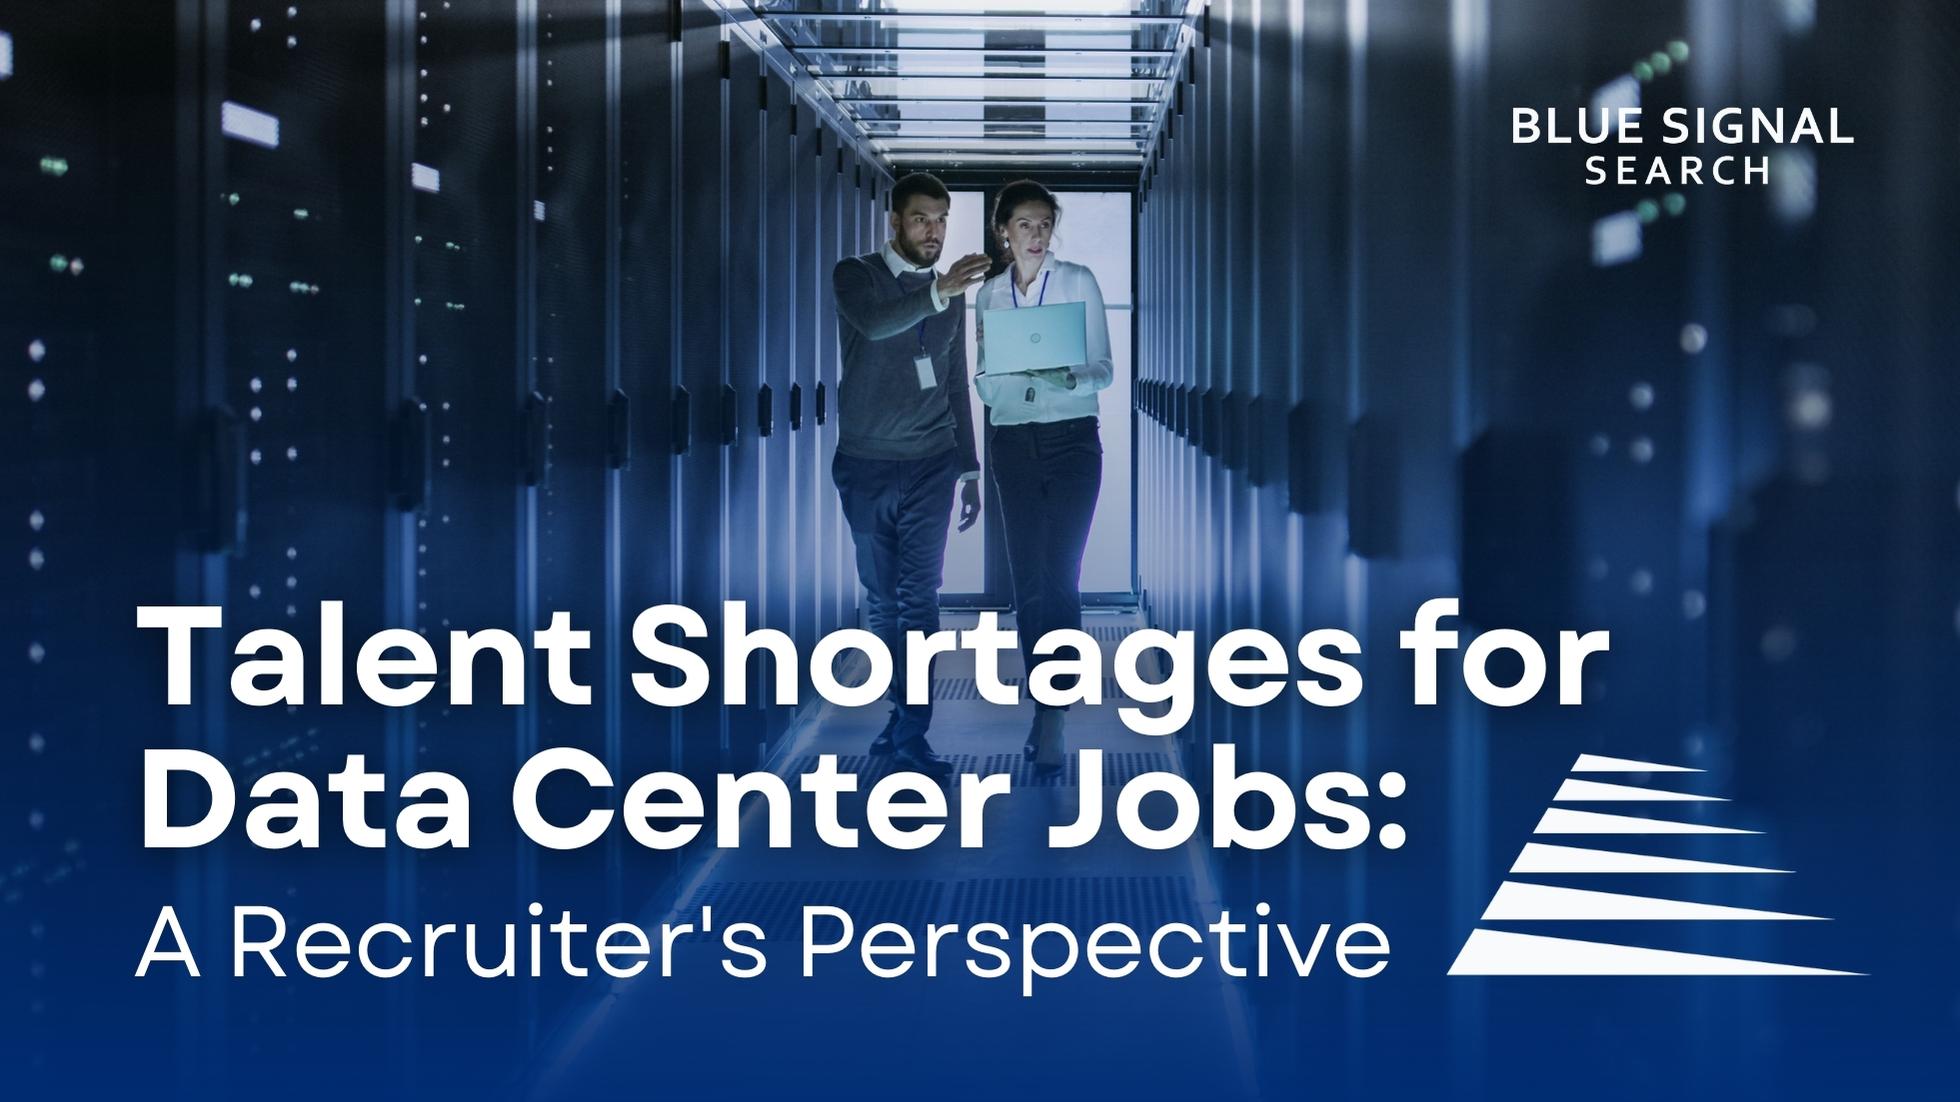 2 data center employees walking down a hall in a data center, with a Blog title overlaying the image reading "Talent Shortages for Data Center Jobs: A Recruiter's Perspective"